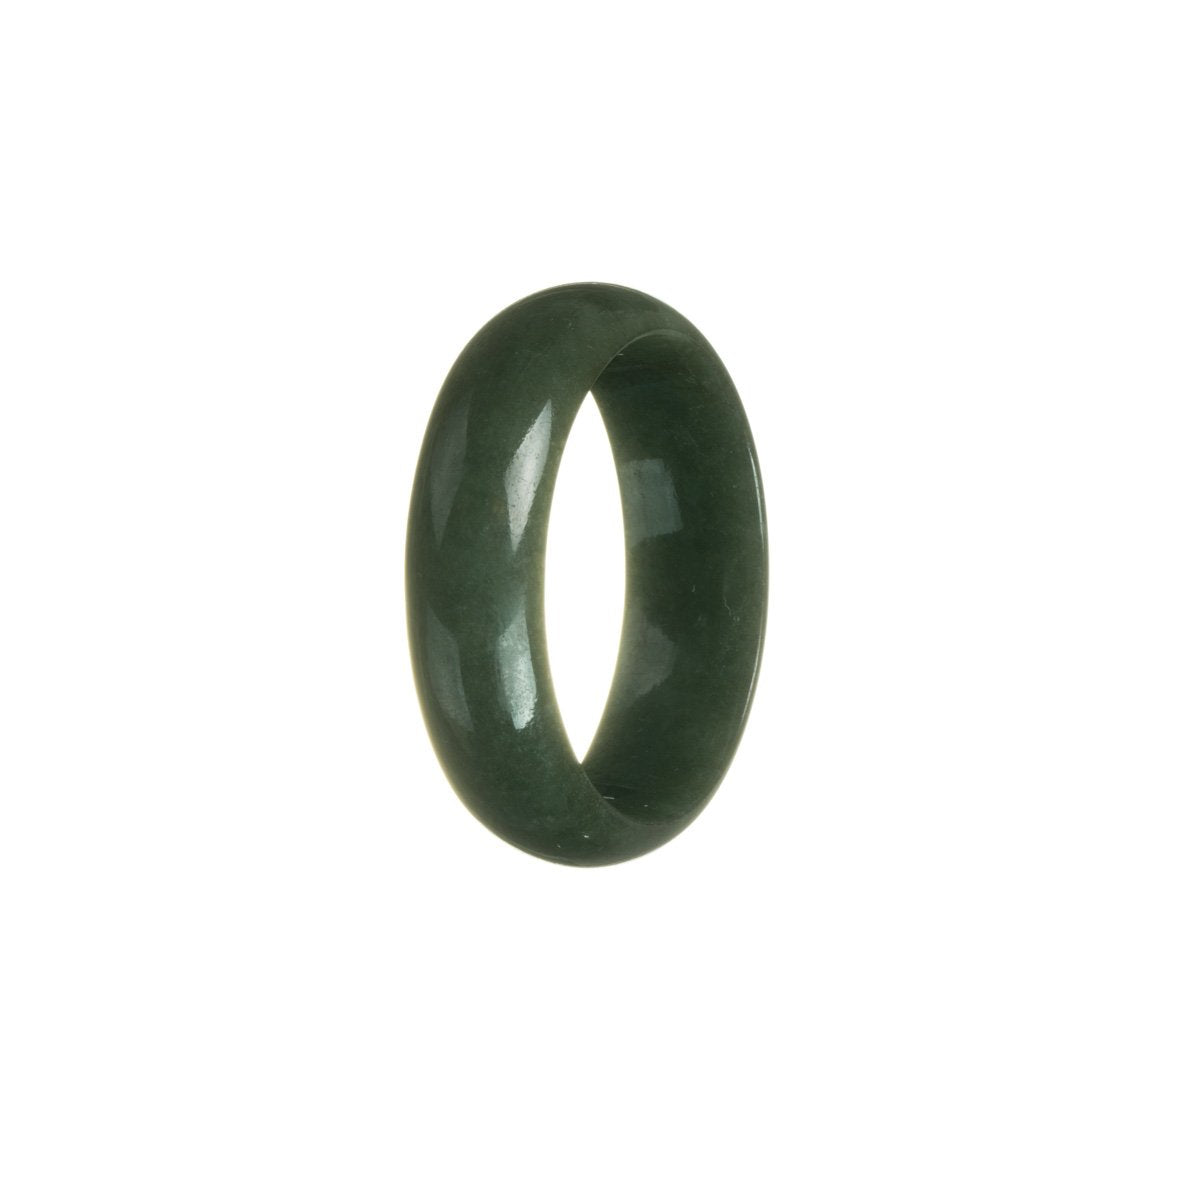 A half moon-shaped green jade bangle, made of real and natural jade, intended for children. Perfect for adding a touch of tradition and elegance to any outfit.